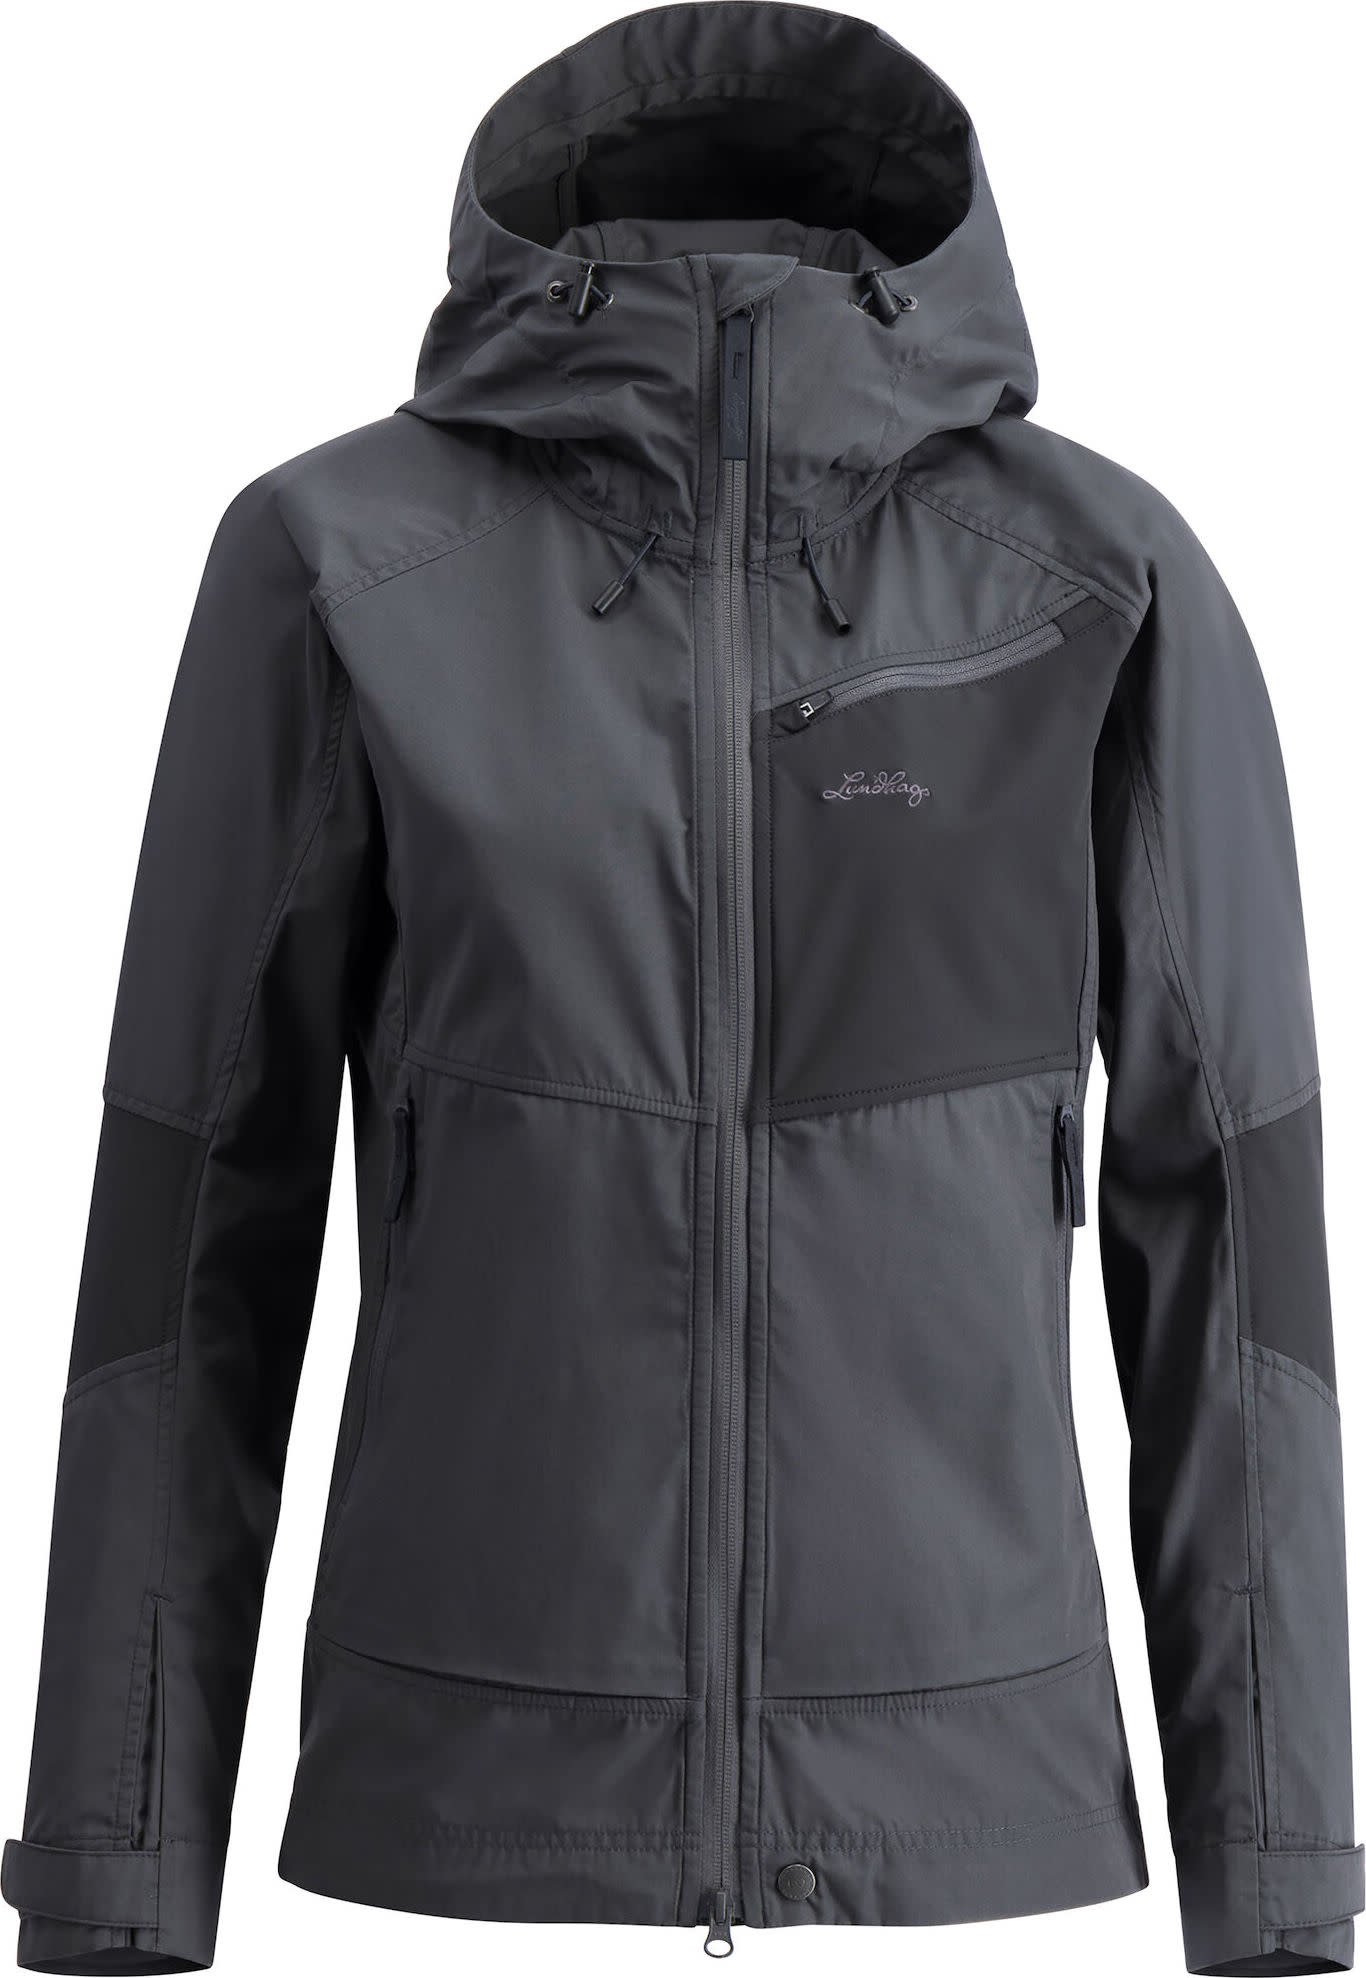 Lundhags Women's Tived Stretch Hybrid Jacket Granite/Charcoal